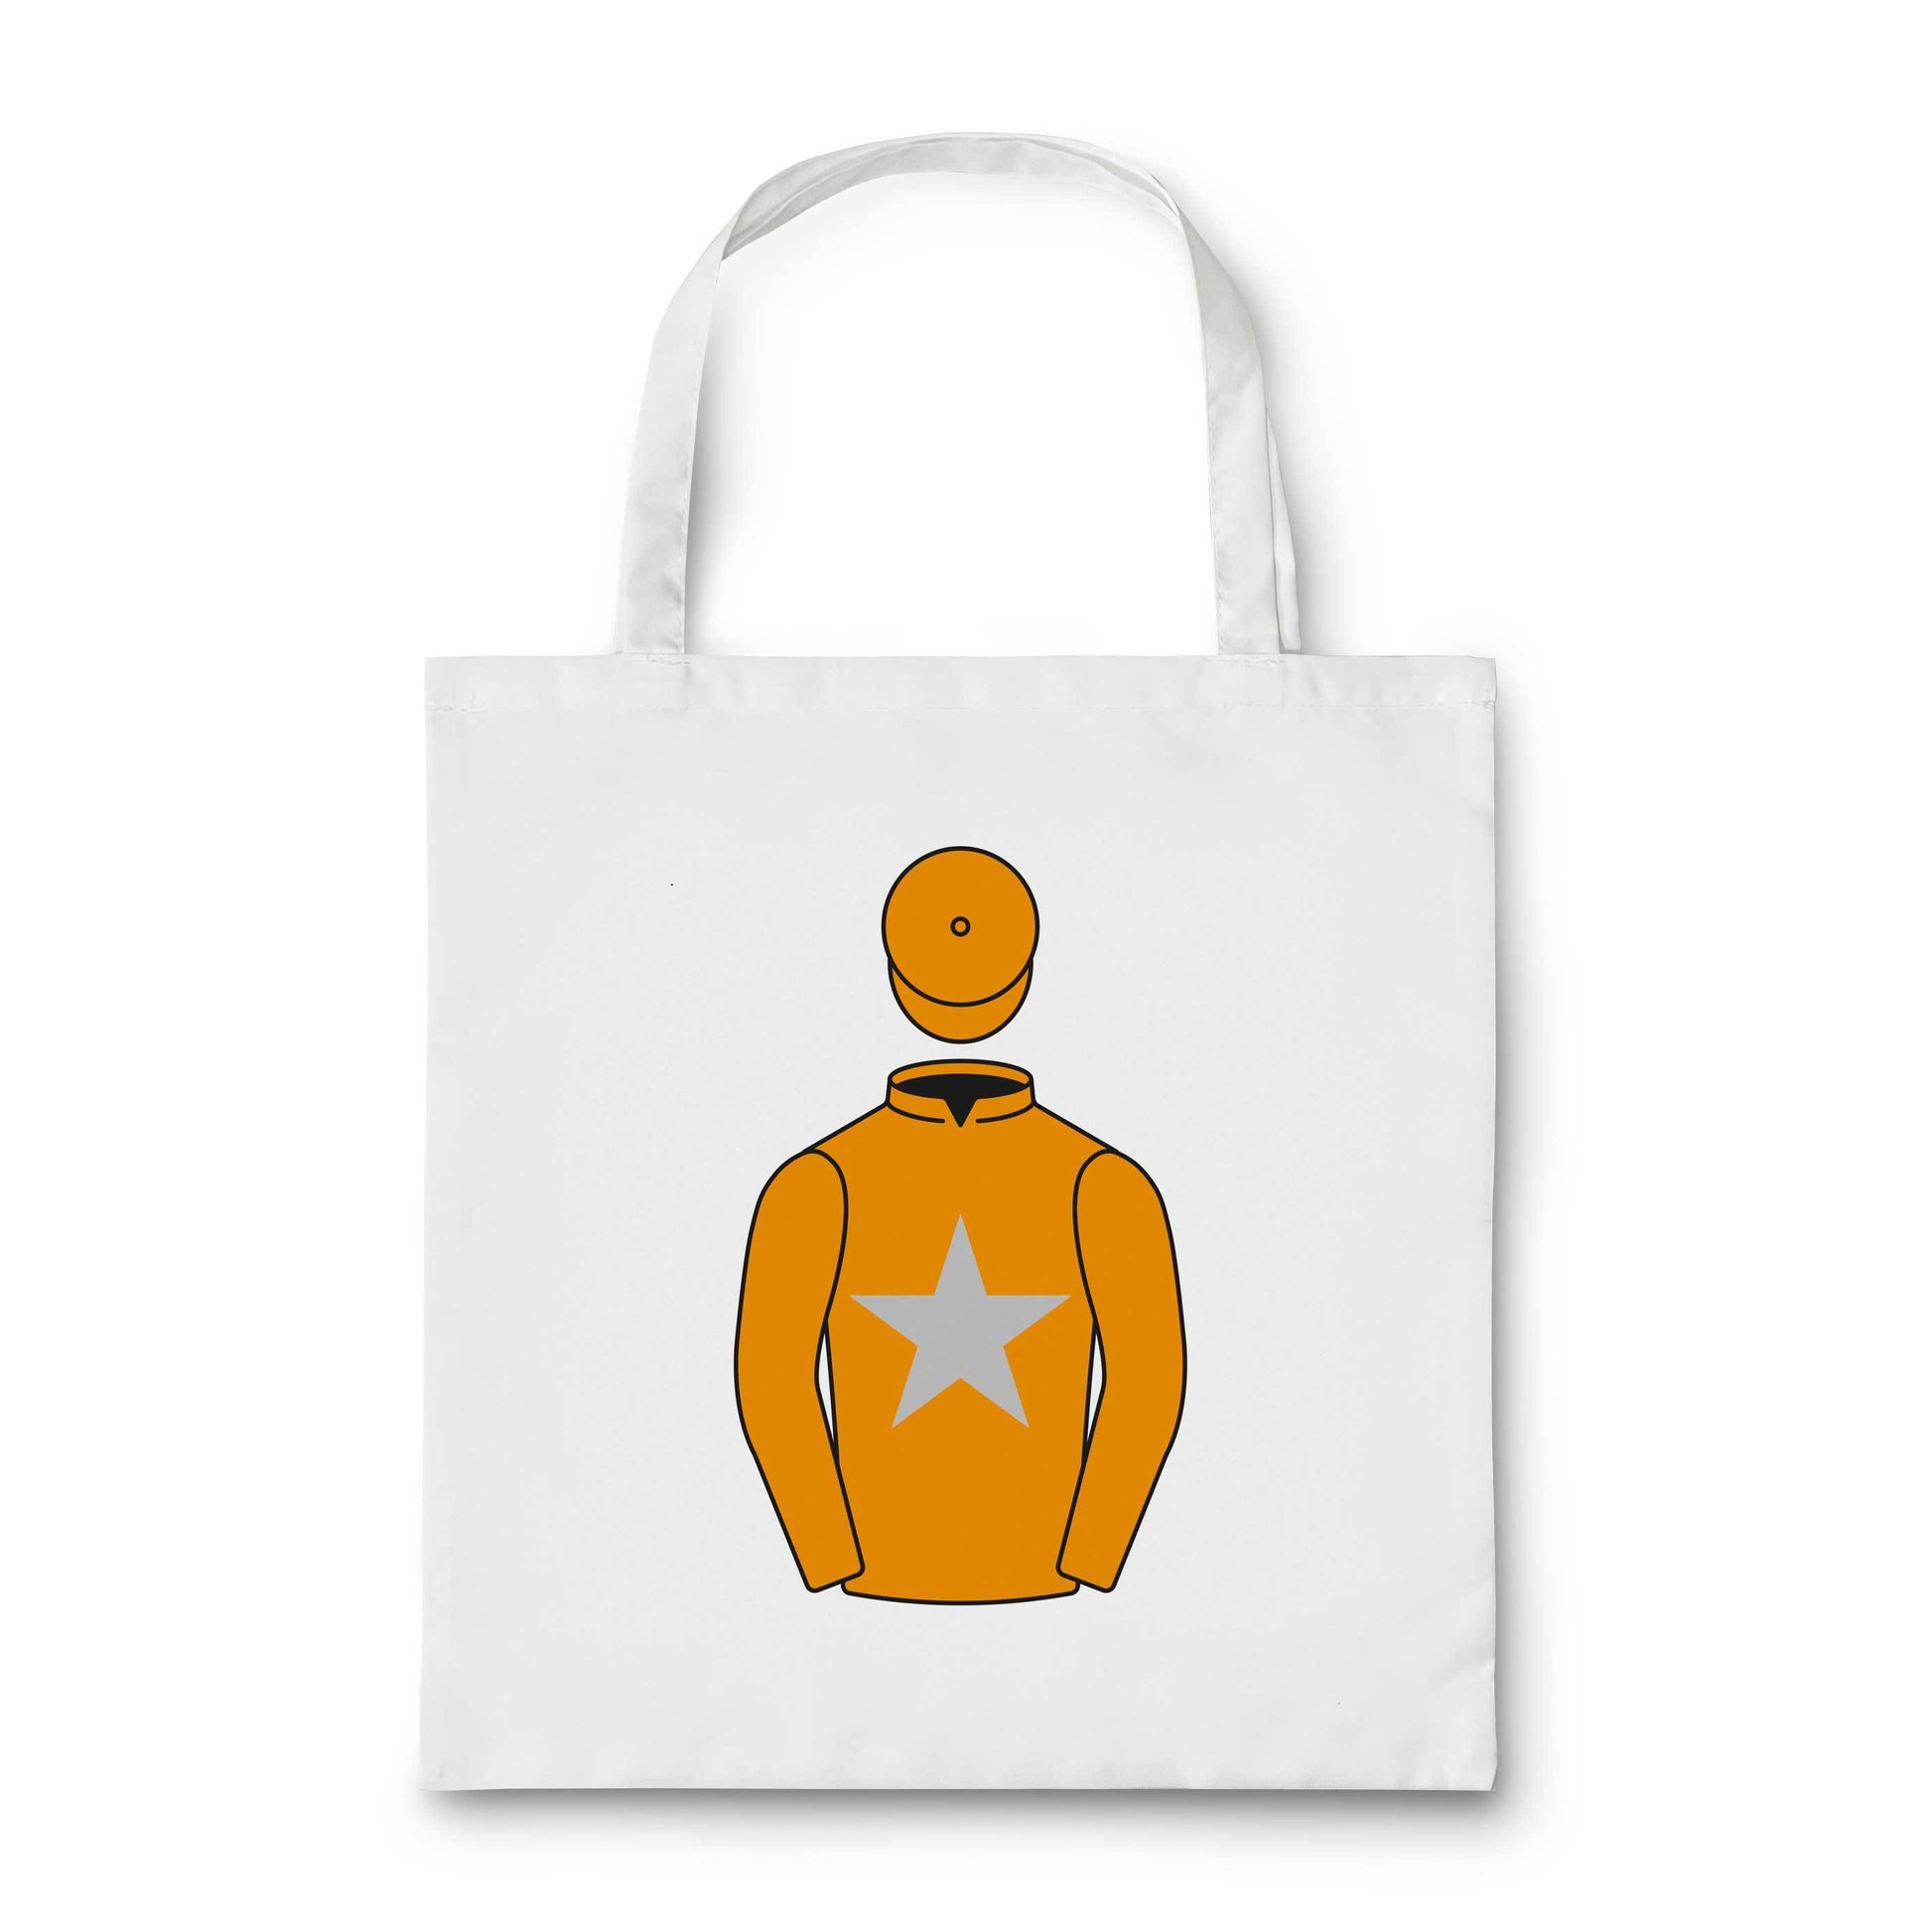 Dare To Dream Racing Tote Bag - Tote Bag - Hacked Up